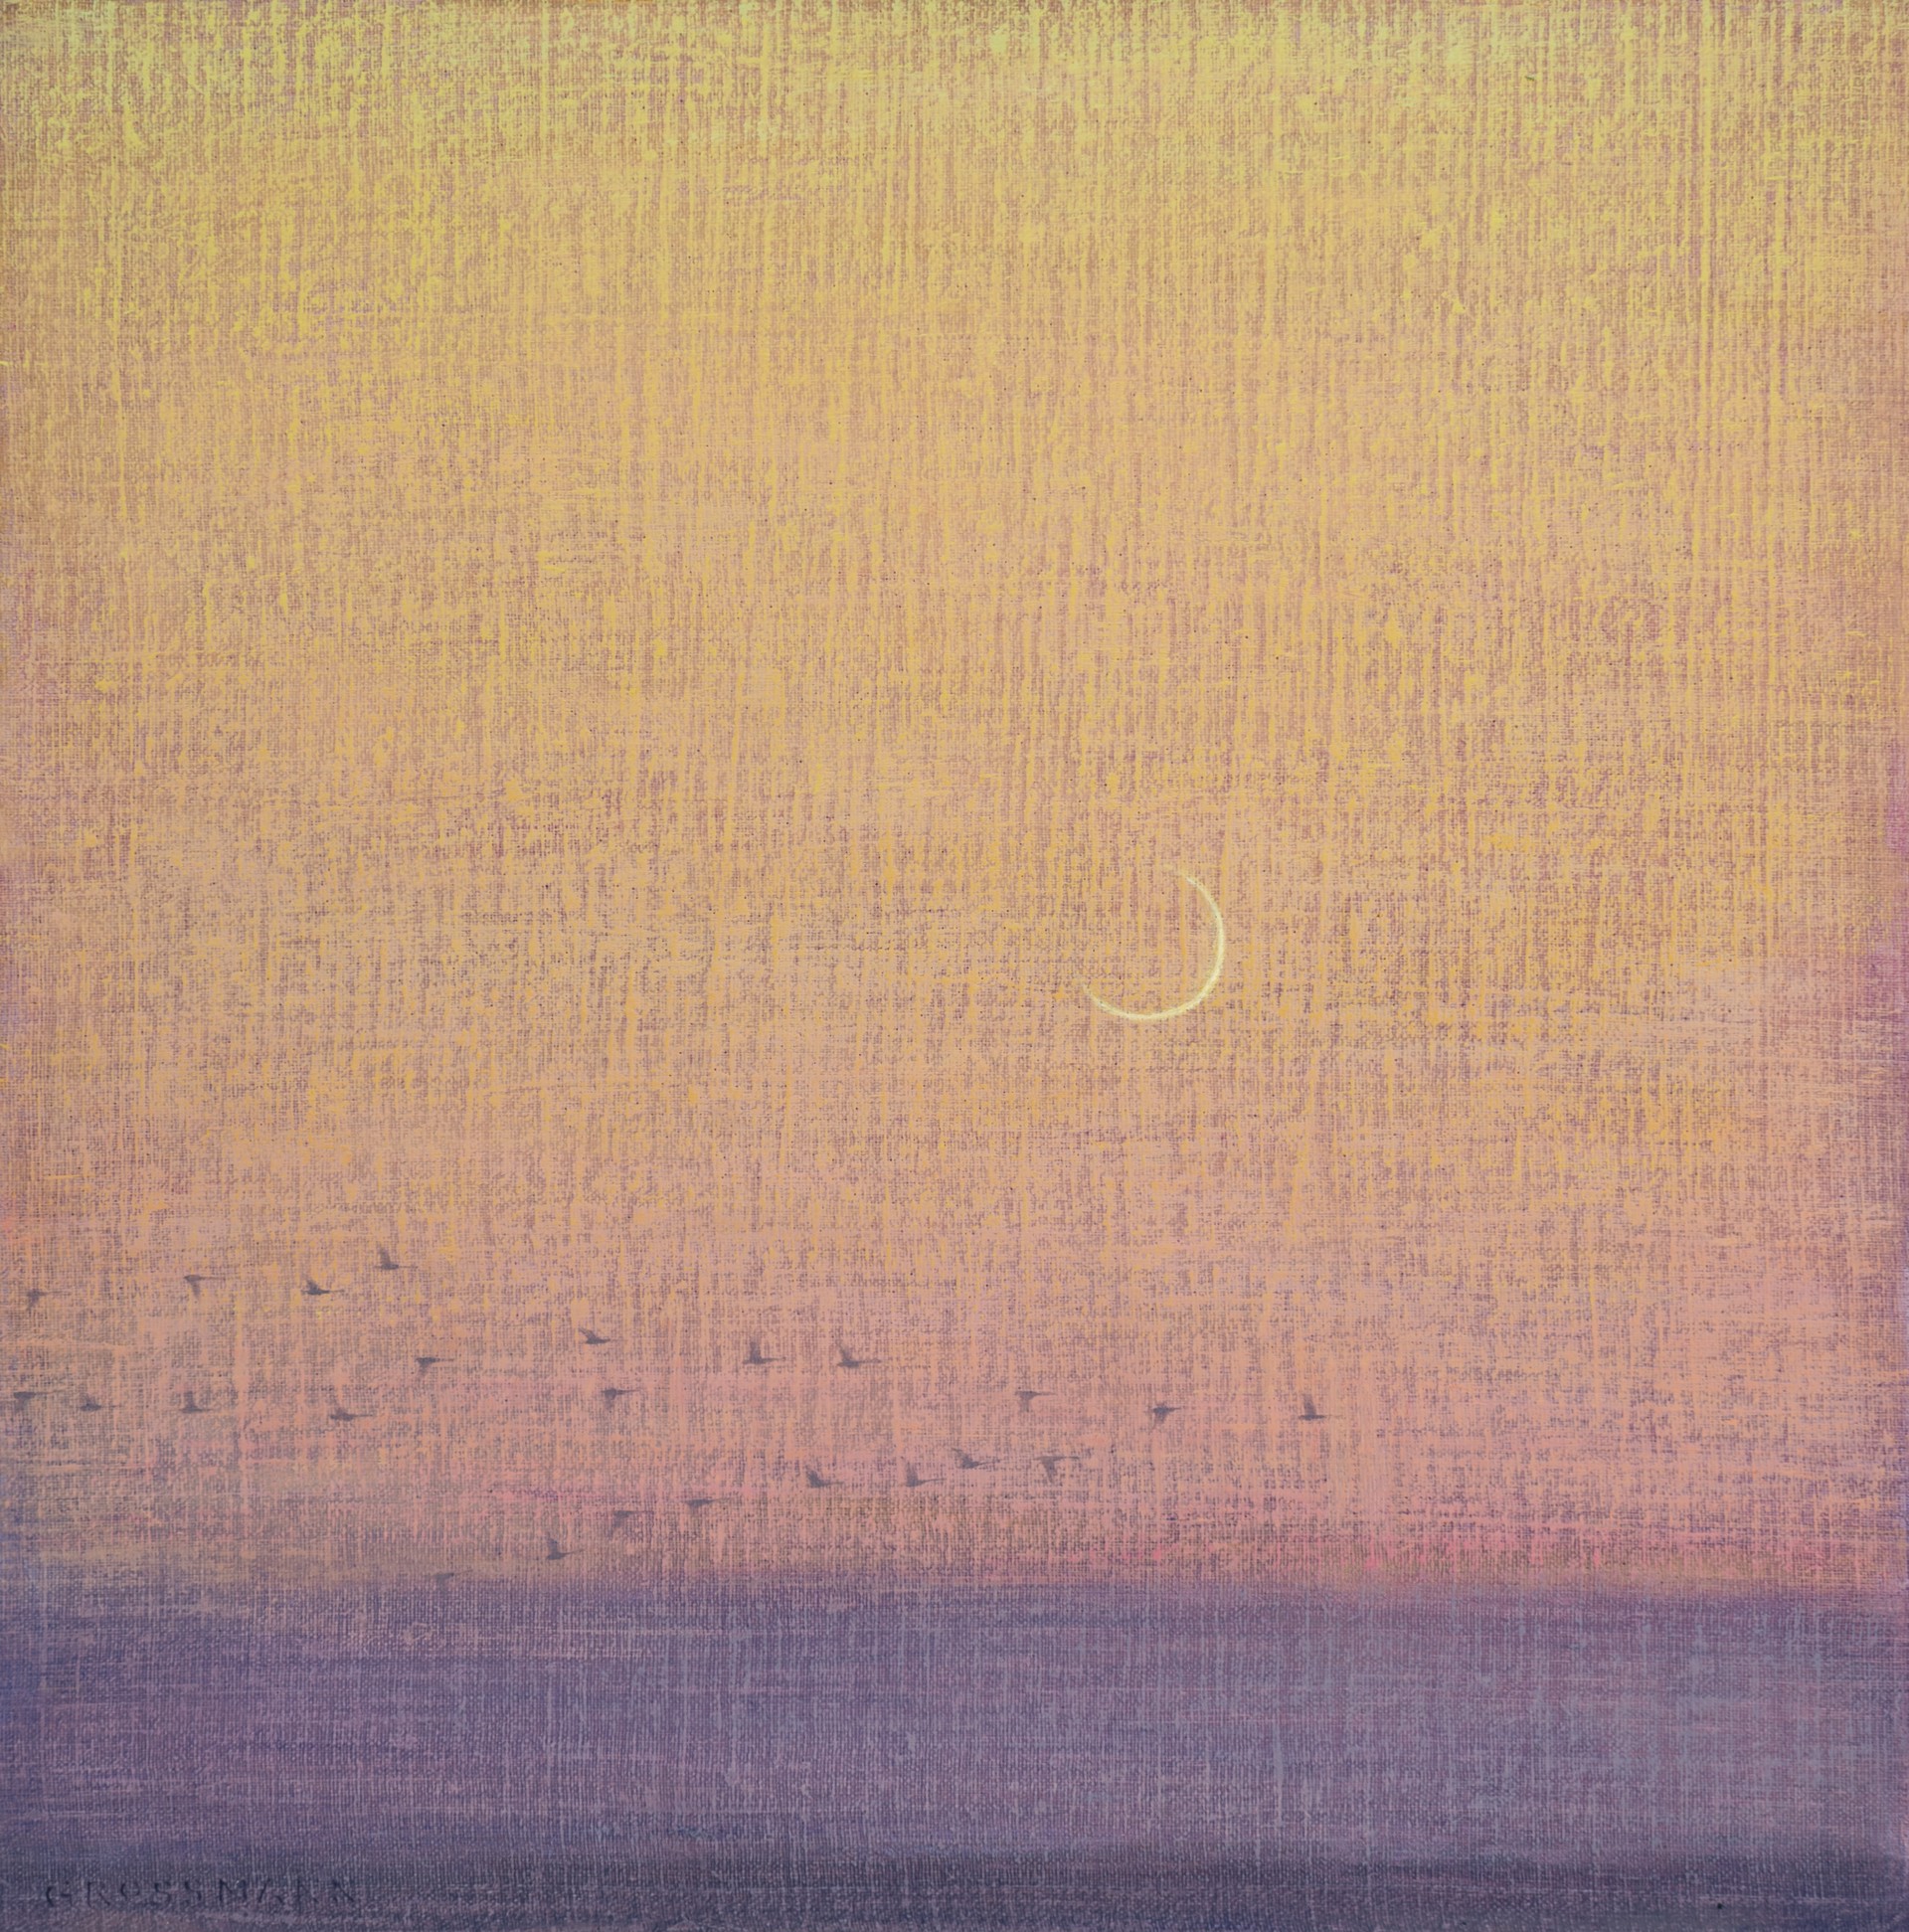 Crescent Moon and Early Flight by David Grossmann